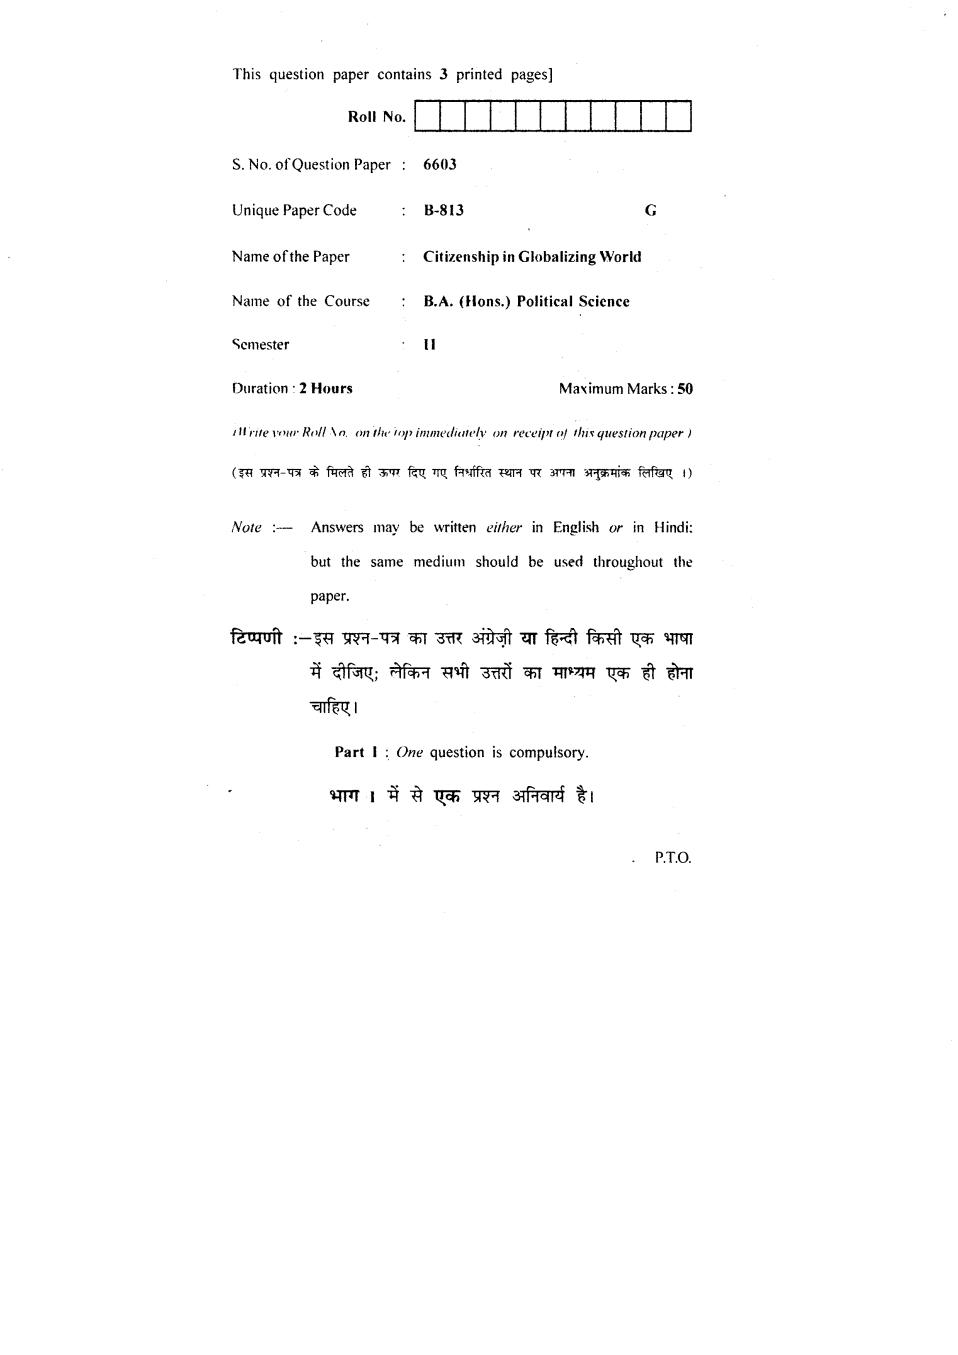 DU SOL Question Paper 2018 BA (Hons.) Political Science - Citizenship in Globalizing World - Page 1